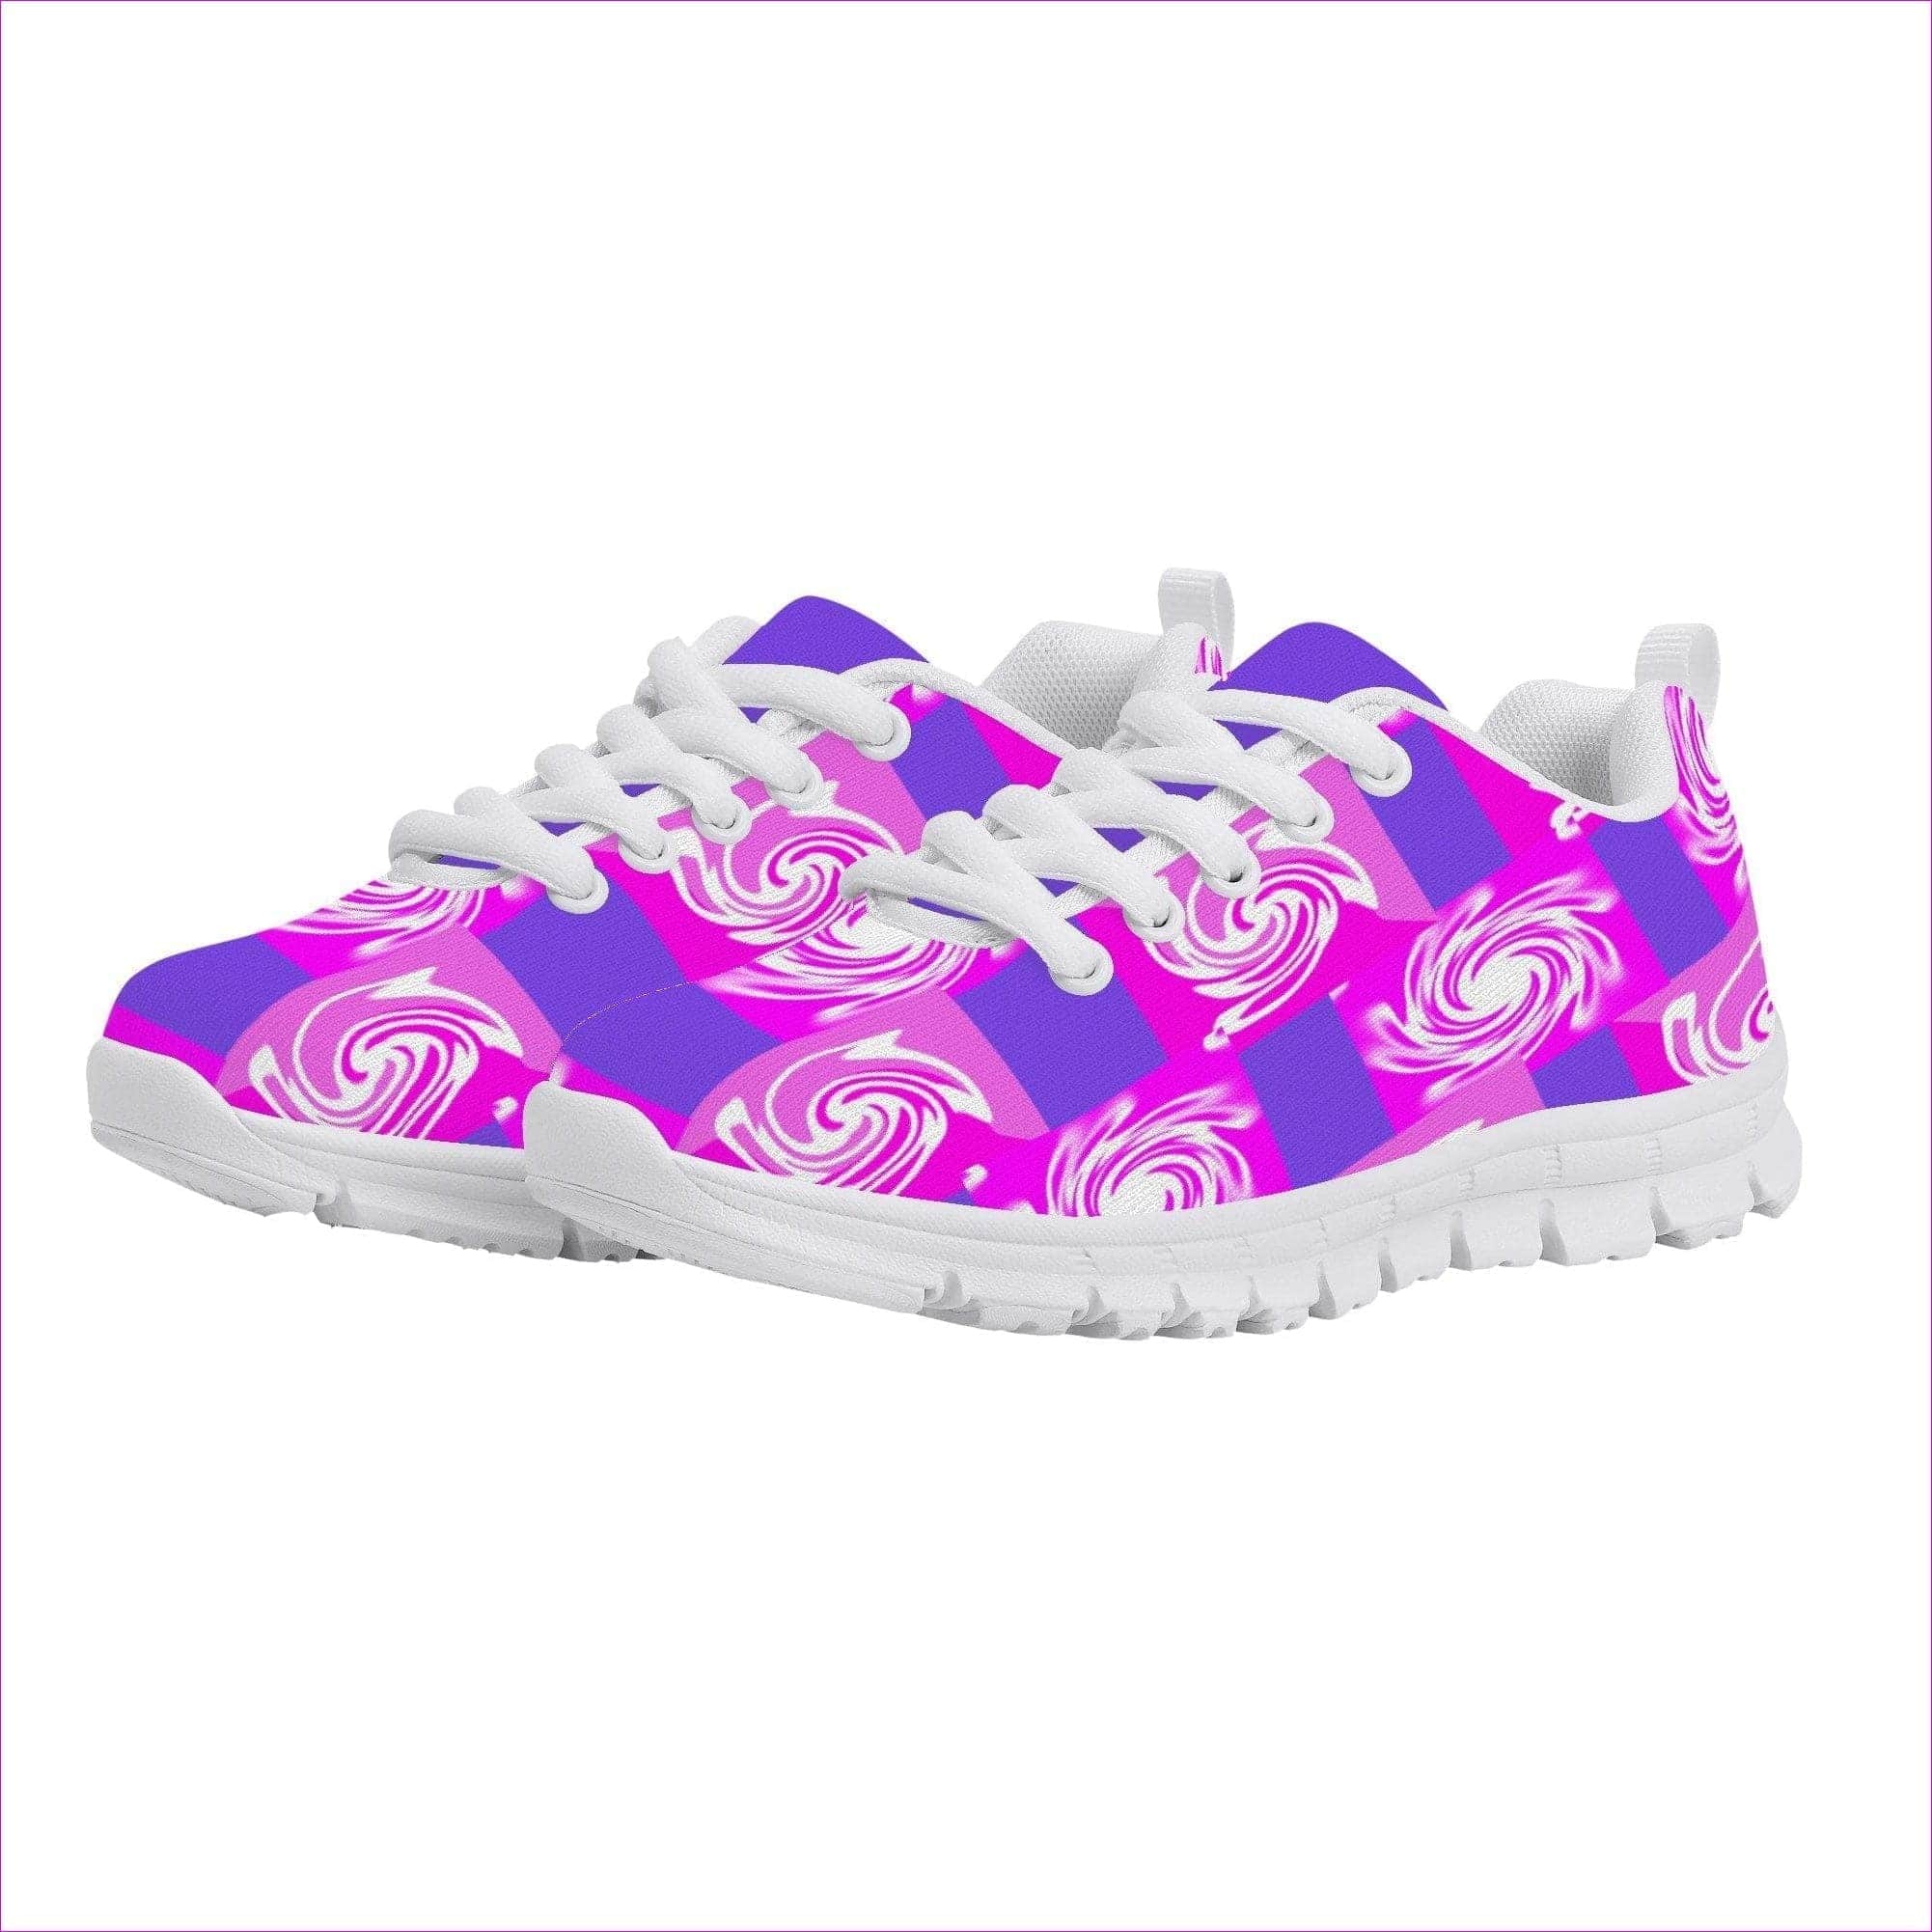 US3 Youth EU34 - Pink Whirlwind Kids Sneakers - White - kids shoe at TFC&H Co.